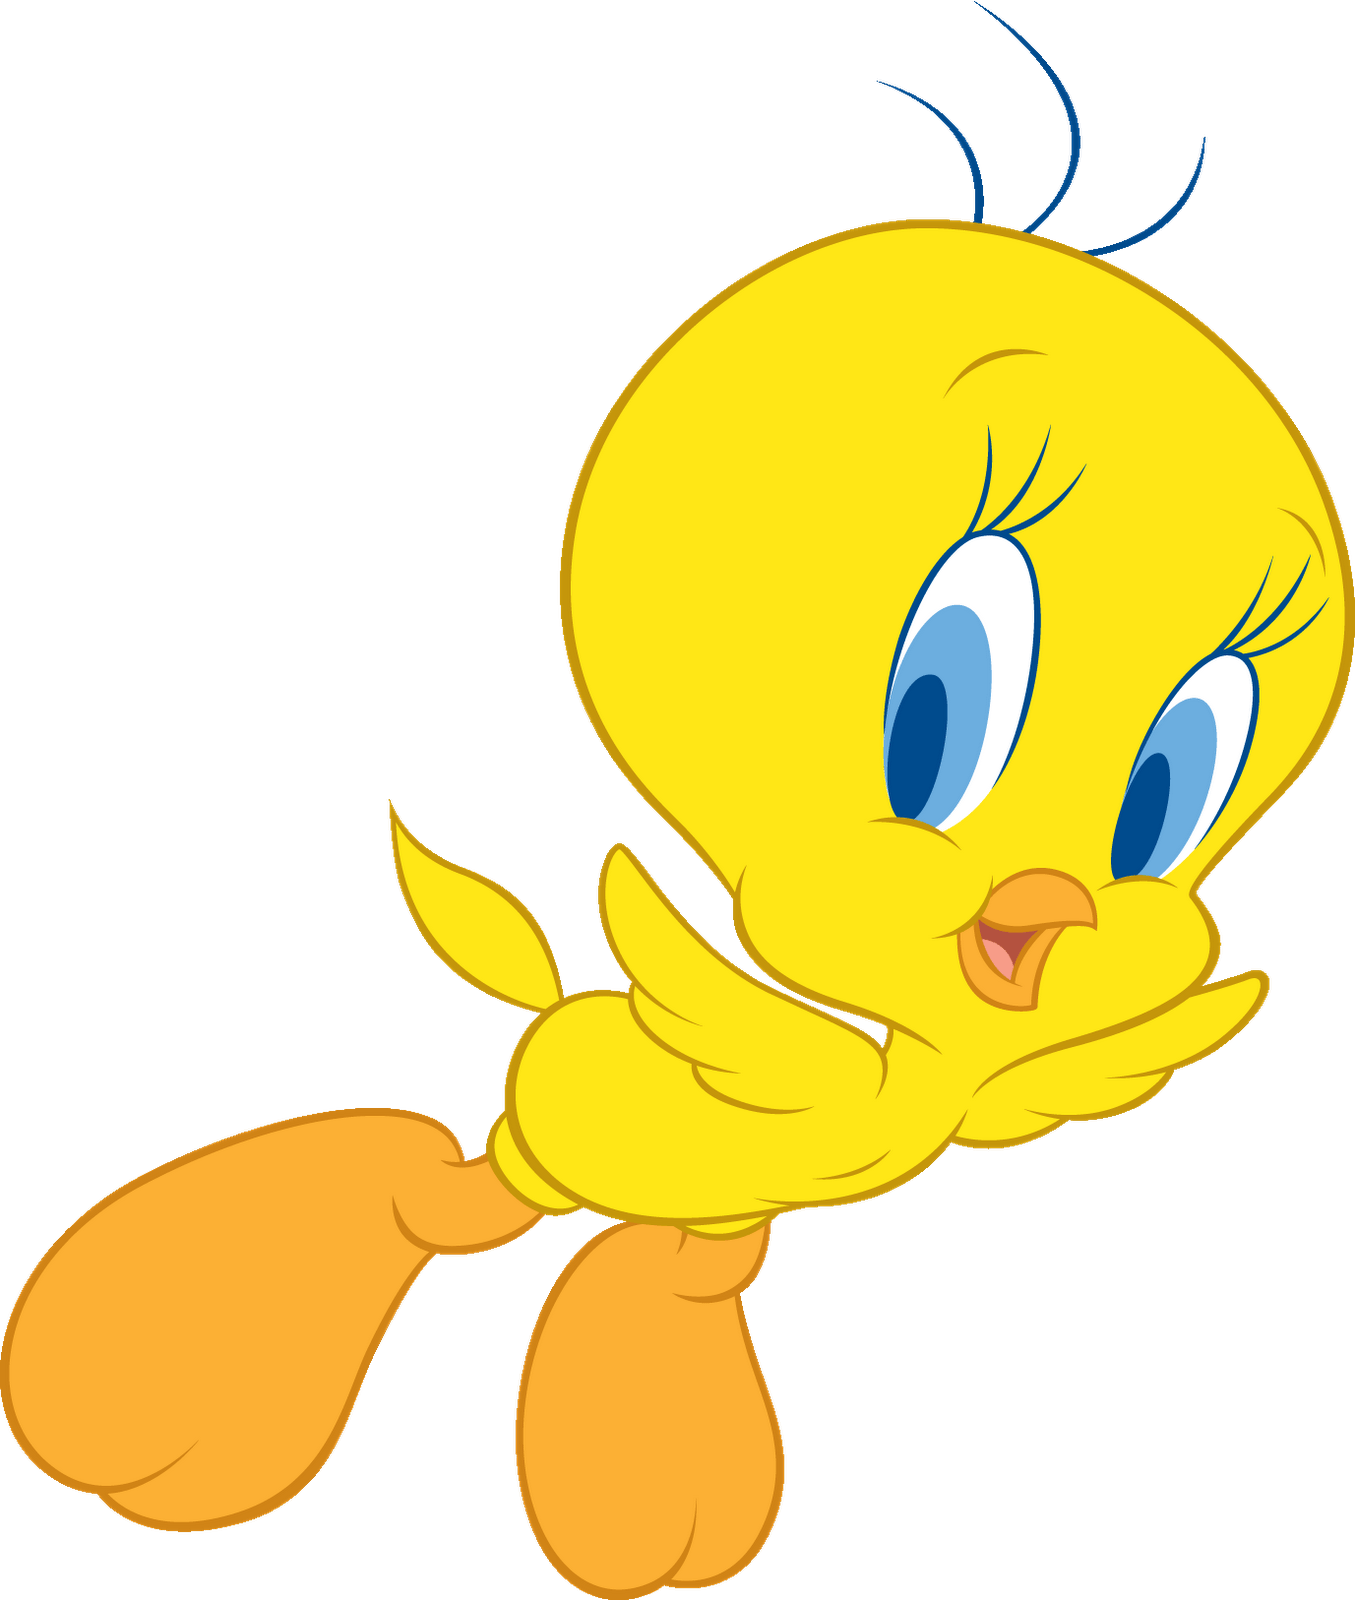 Tweety Bird Face 3694 HD Wallpaper Picture. Top Background